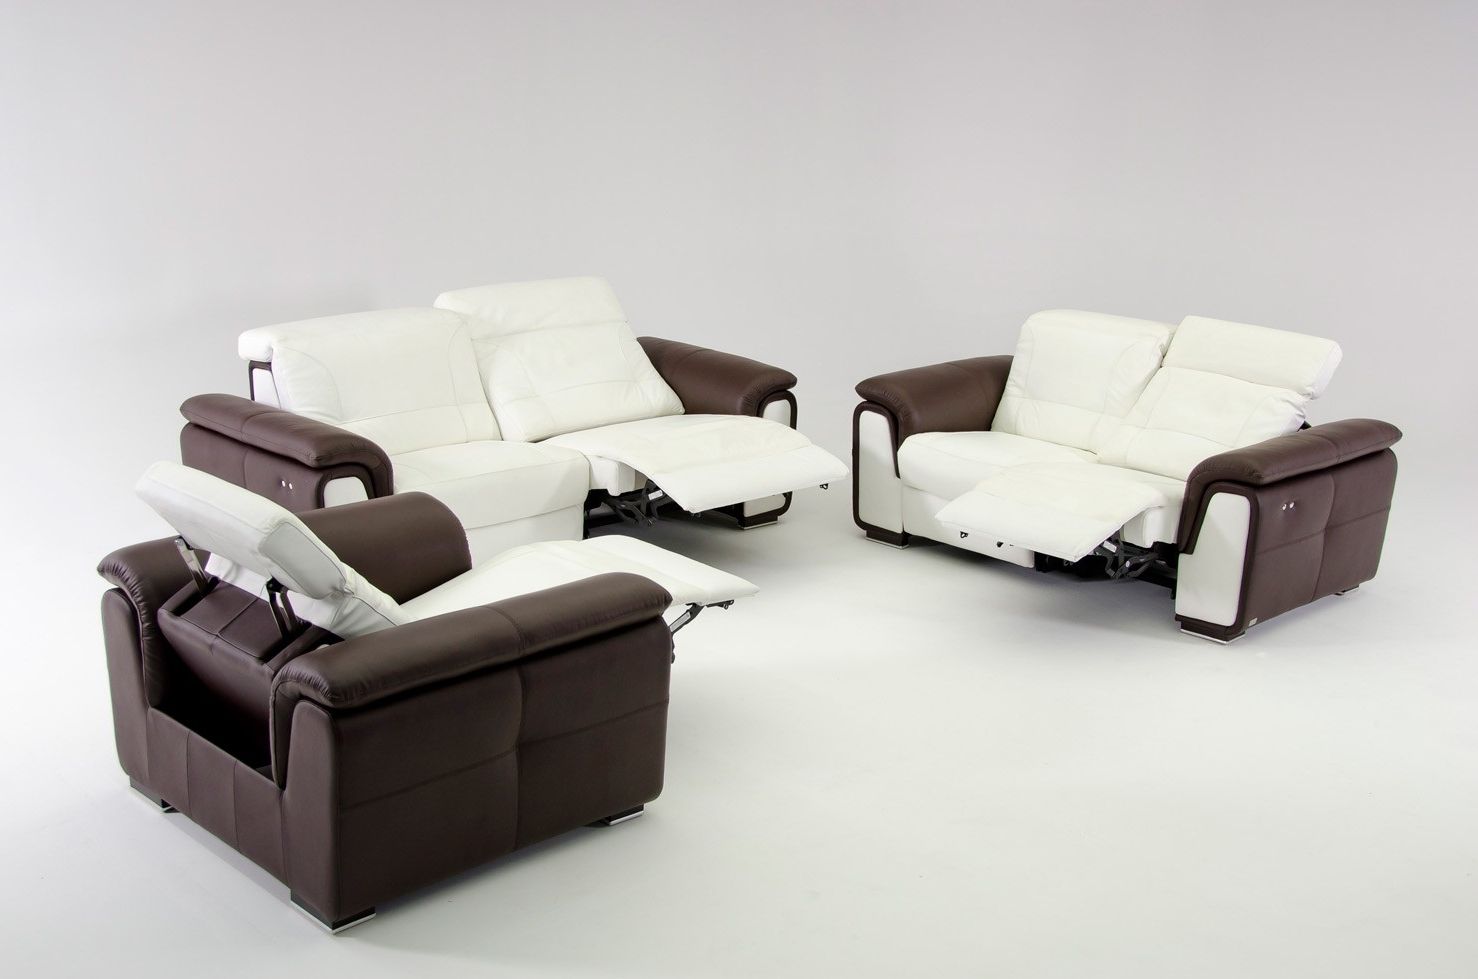 Preferred Sofa : Sofa Recliners For Sale Single Sofa Sleeper Chair Single Regarding Sectional Sofas With Electric Recliners (View 7 of 15)